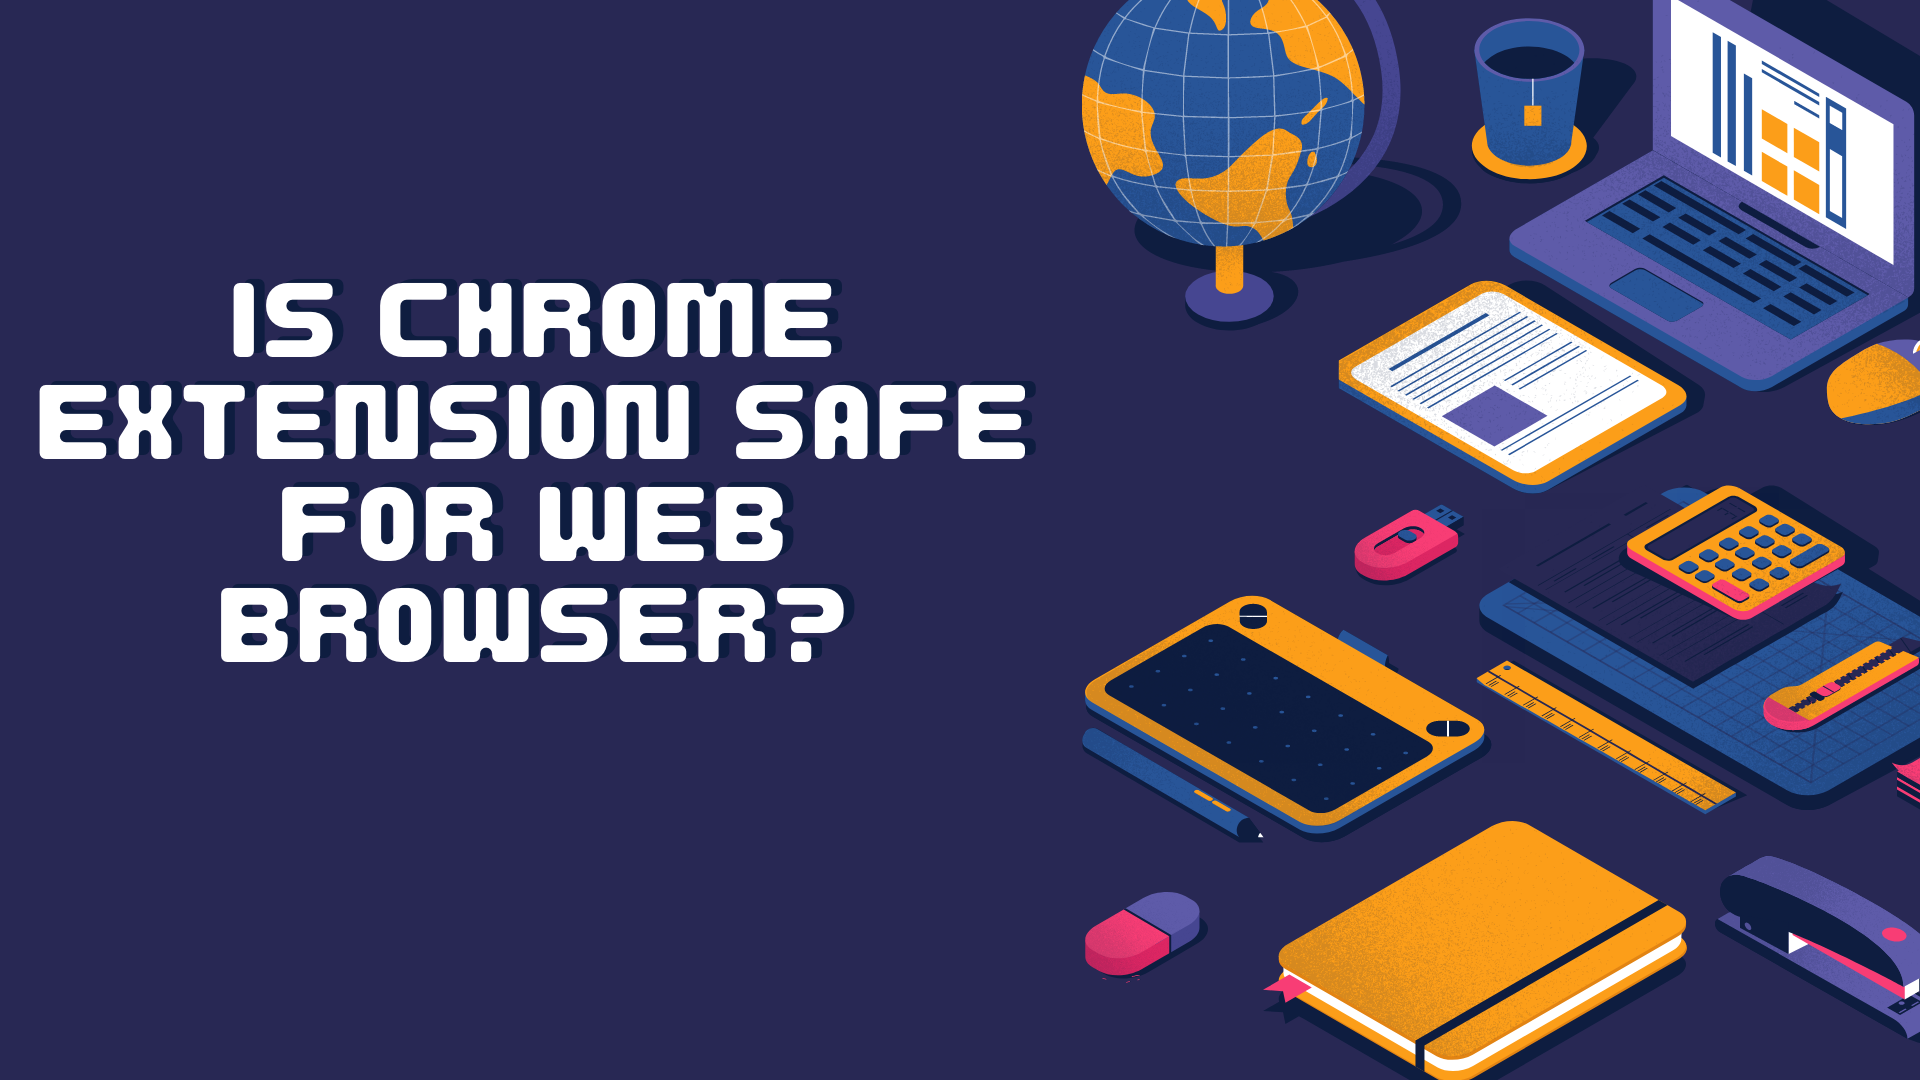 Is Chrome extension safe for web browser?